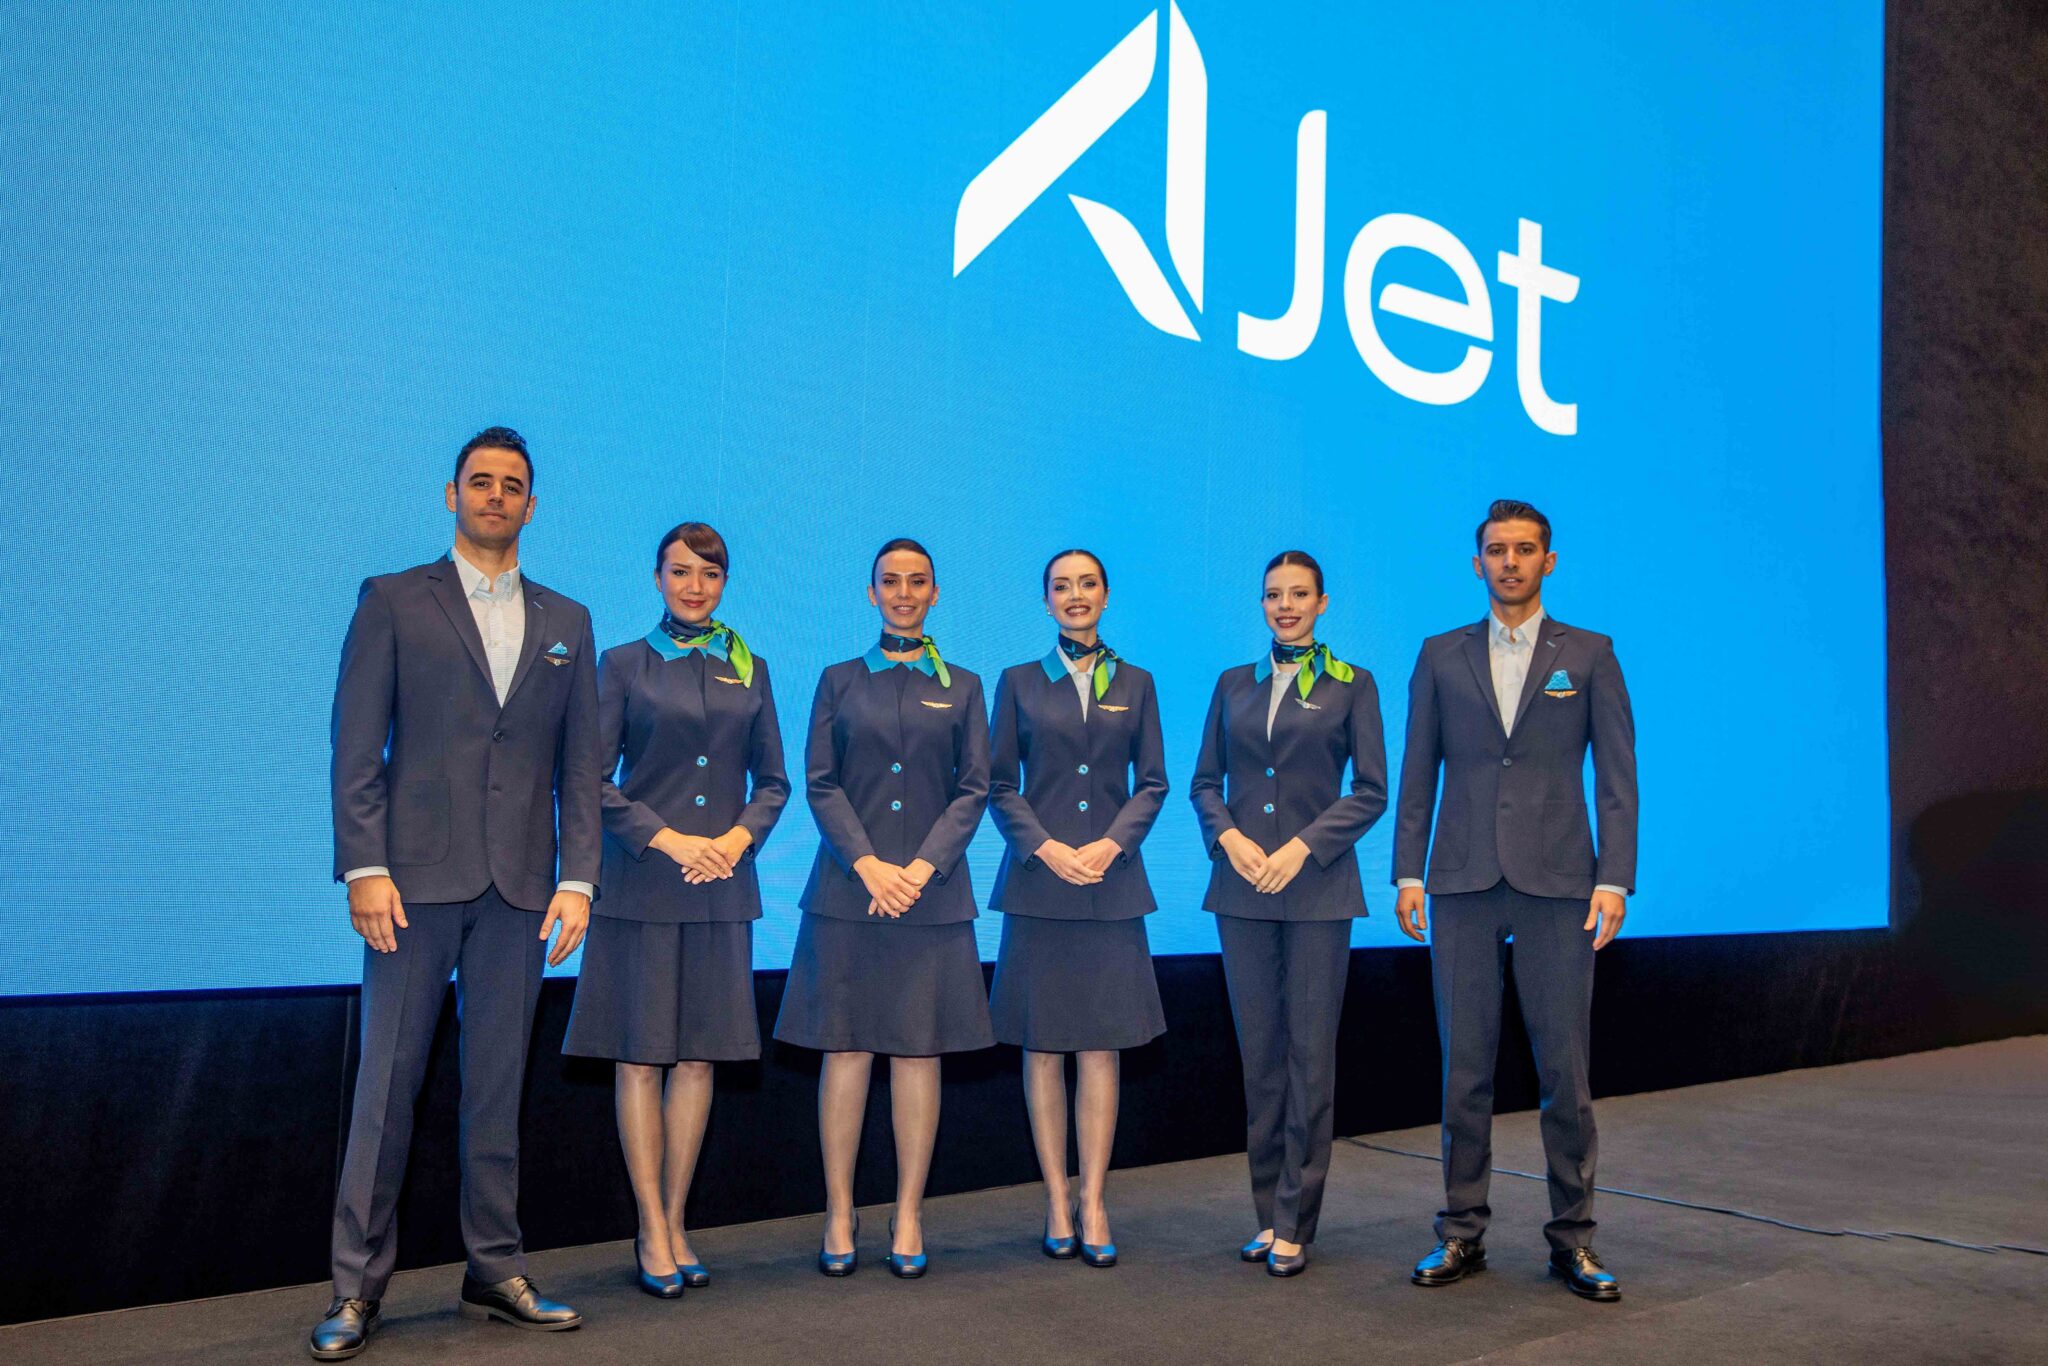 AJet Turkish Airlines' wholly-owned subsidiary AJET to commence flights in 2024 - TravelDailyNews International AJet new name